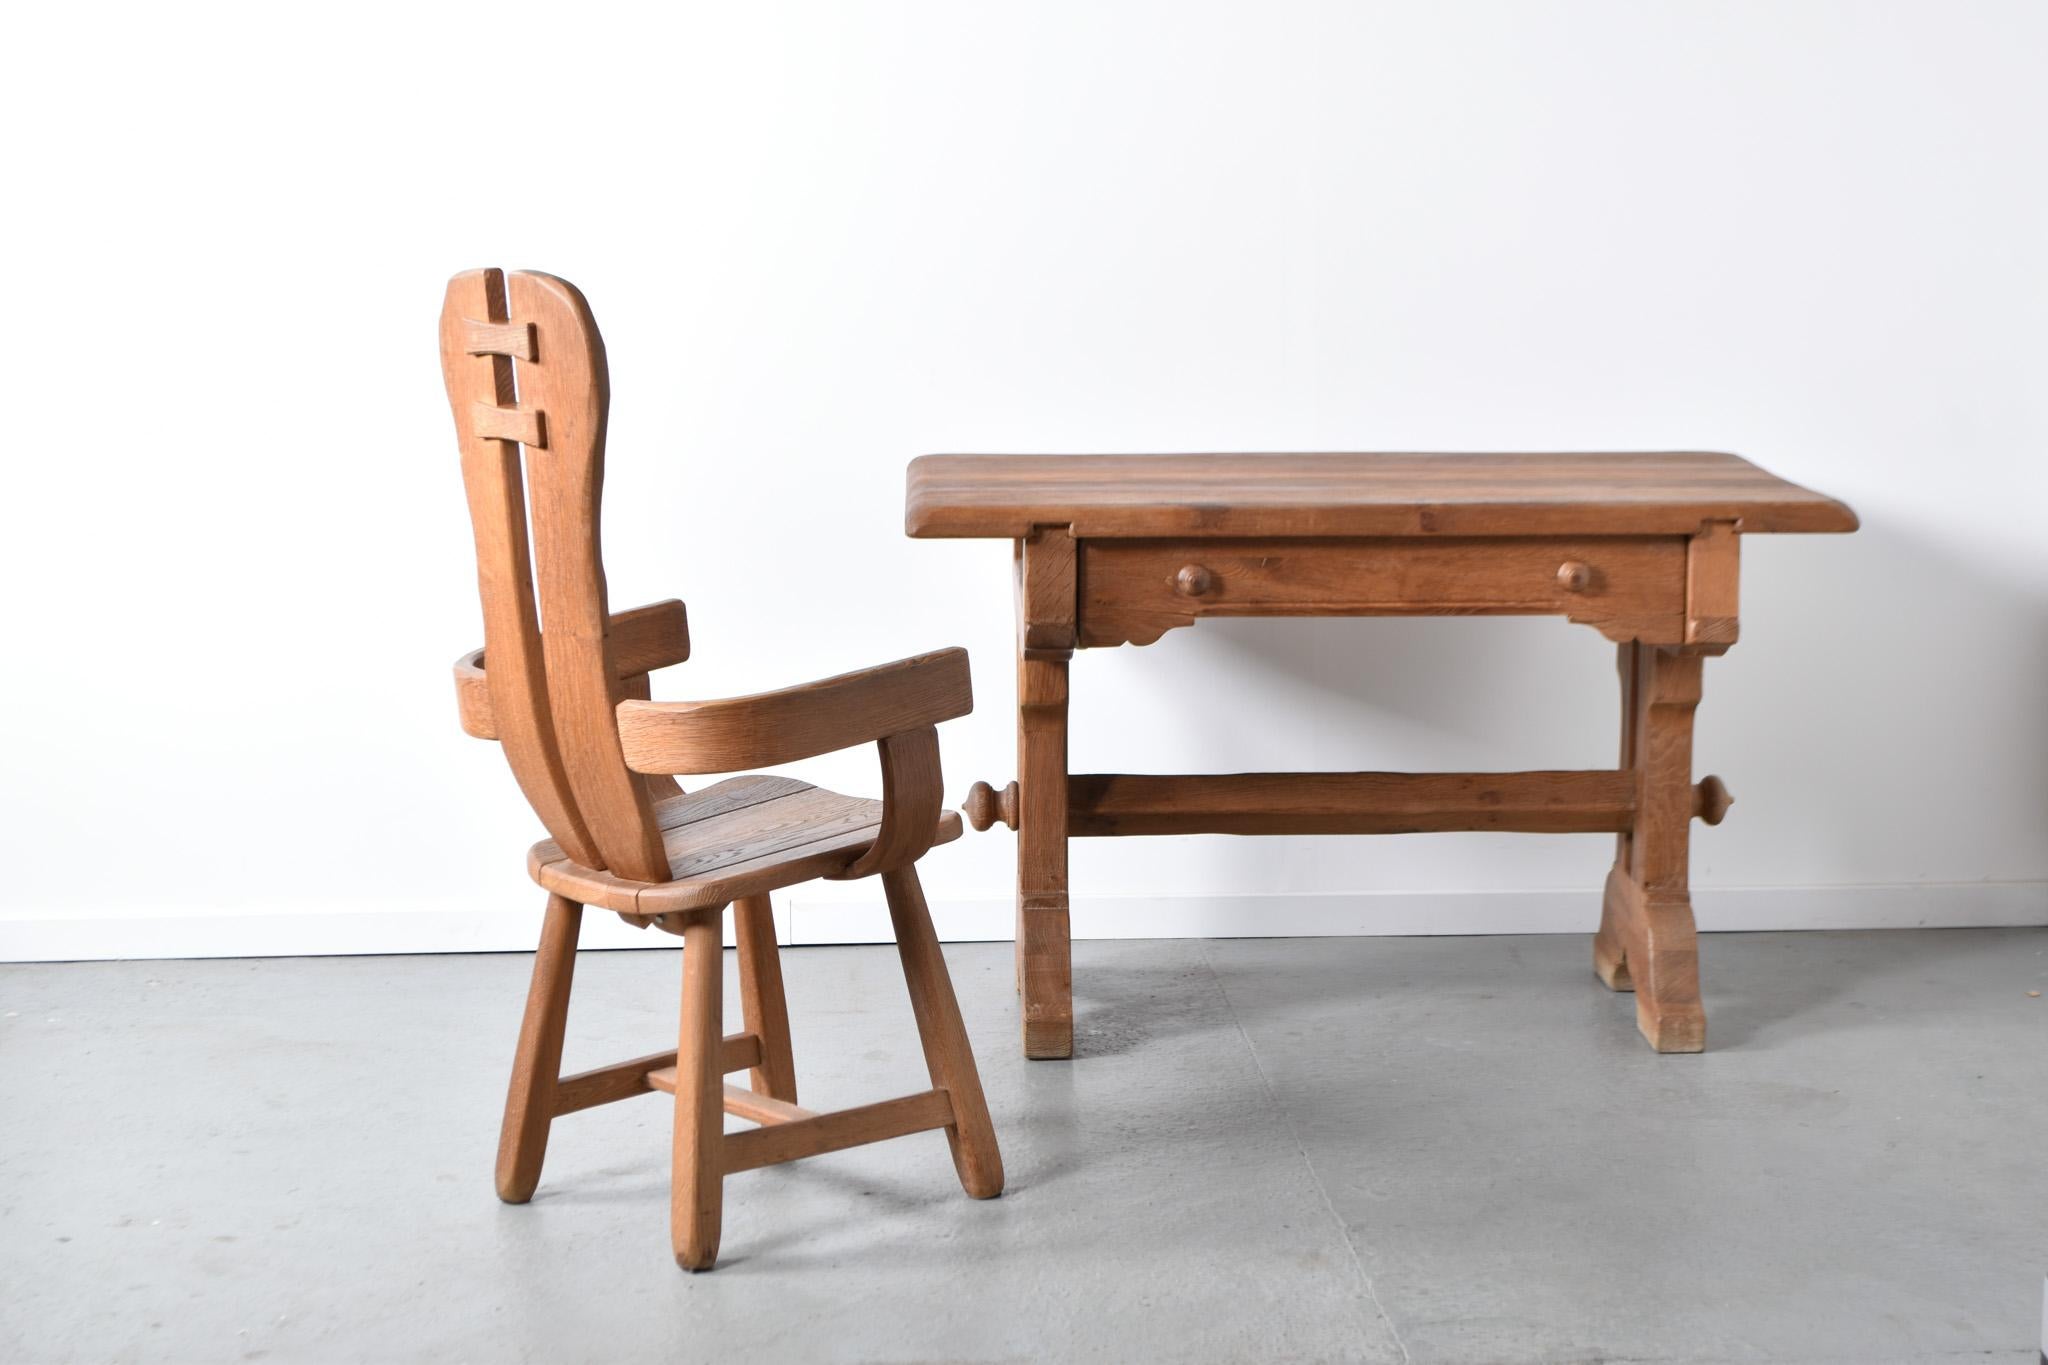  De Puydt Brutalist Oak Desk and Armchair: Iconic Belgian Craftsmanship from the 1970s

De Puydt Brutalist Oak Desk and Armchair, a remarkable testament to Belgian artistry hailing from the bold era of the 1970s. This ensemble embodies the raw